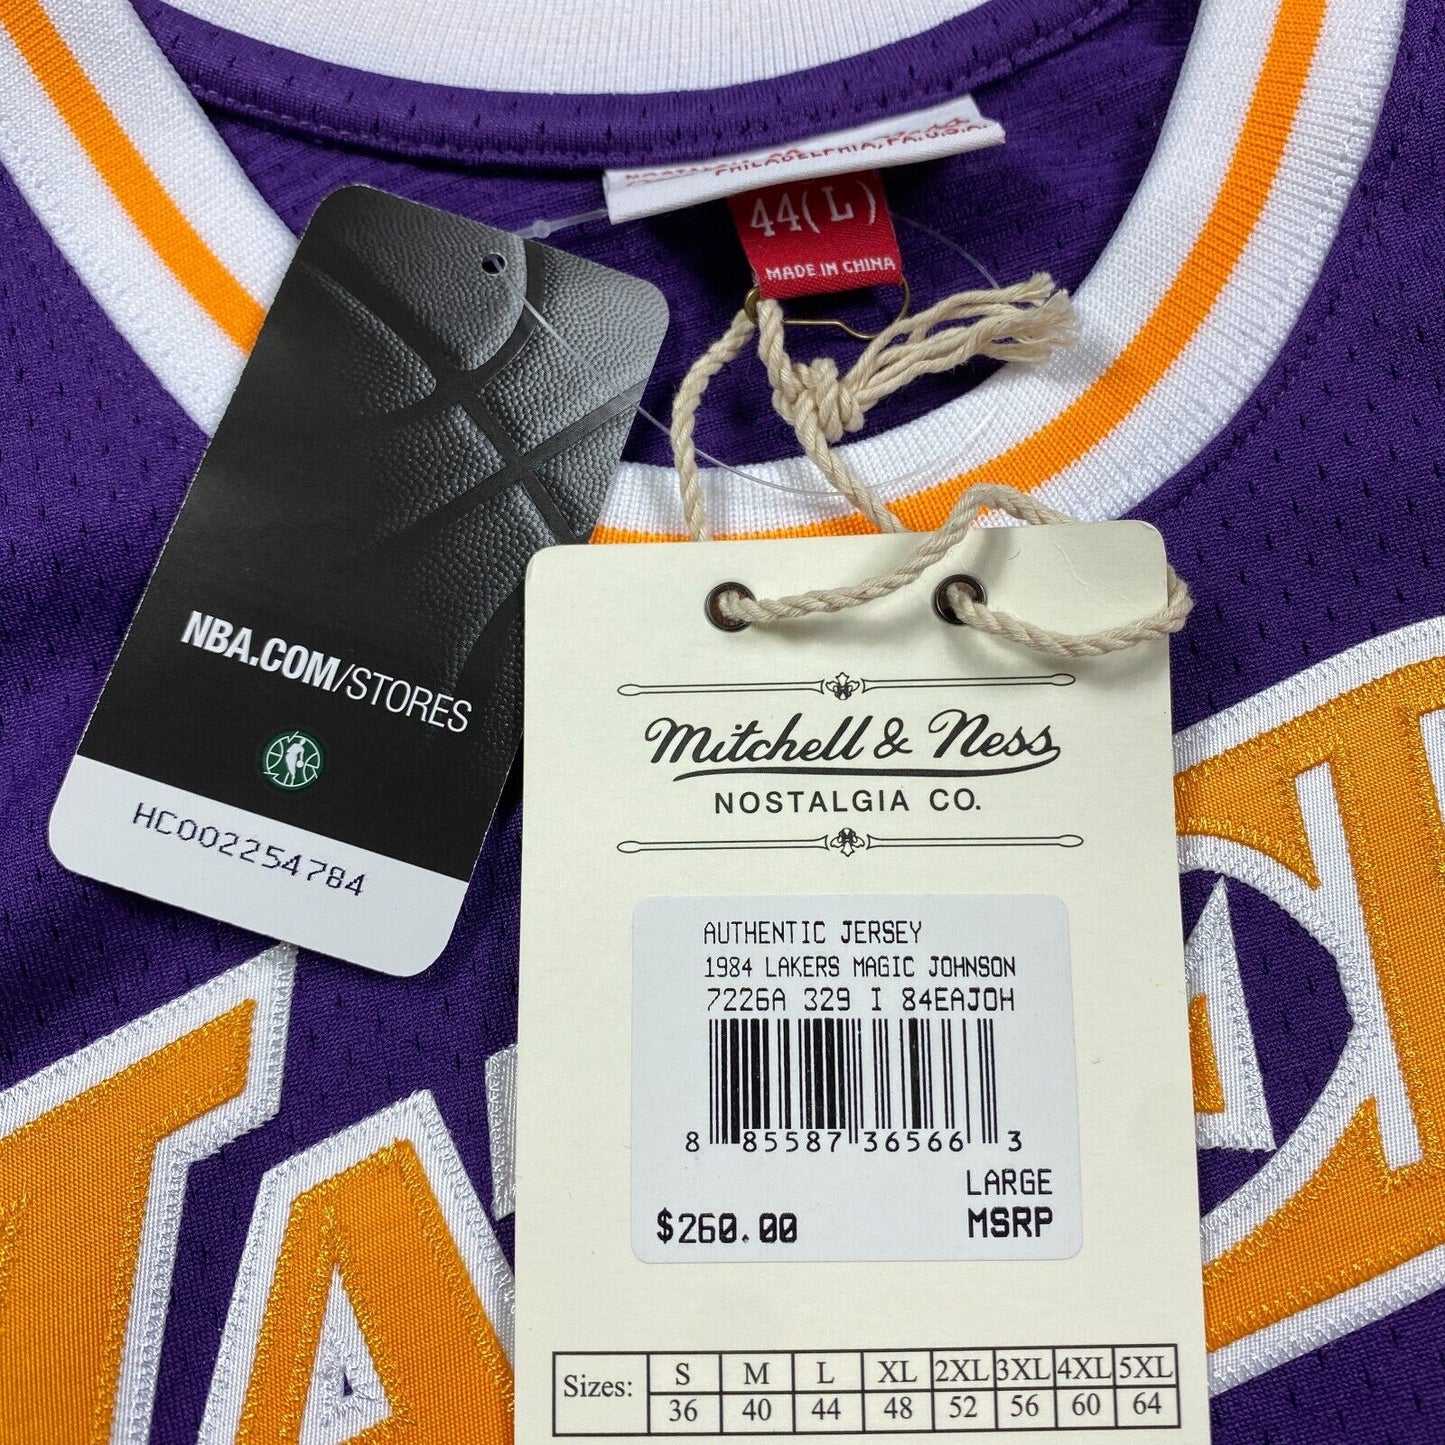 100% Authentic Magic Johnson Mitchell & Ness 84 85 Lakers Jersey Size 44 L Mens